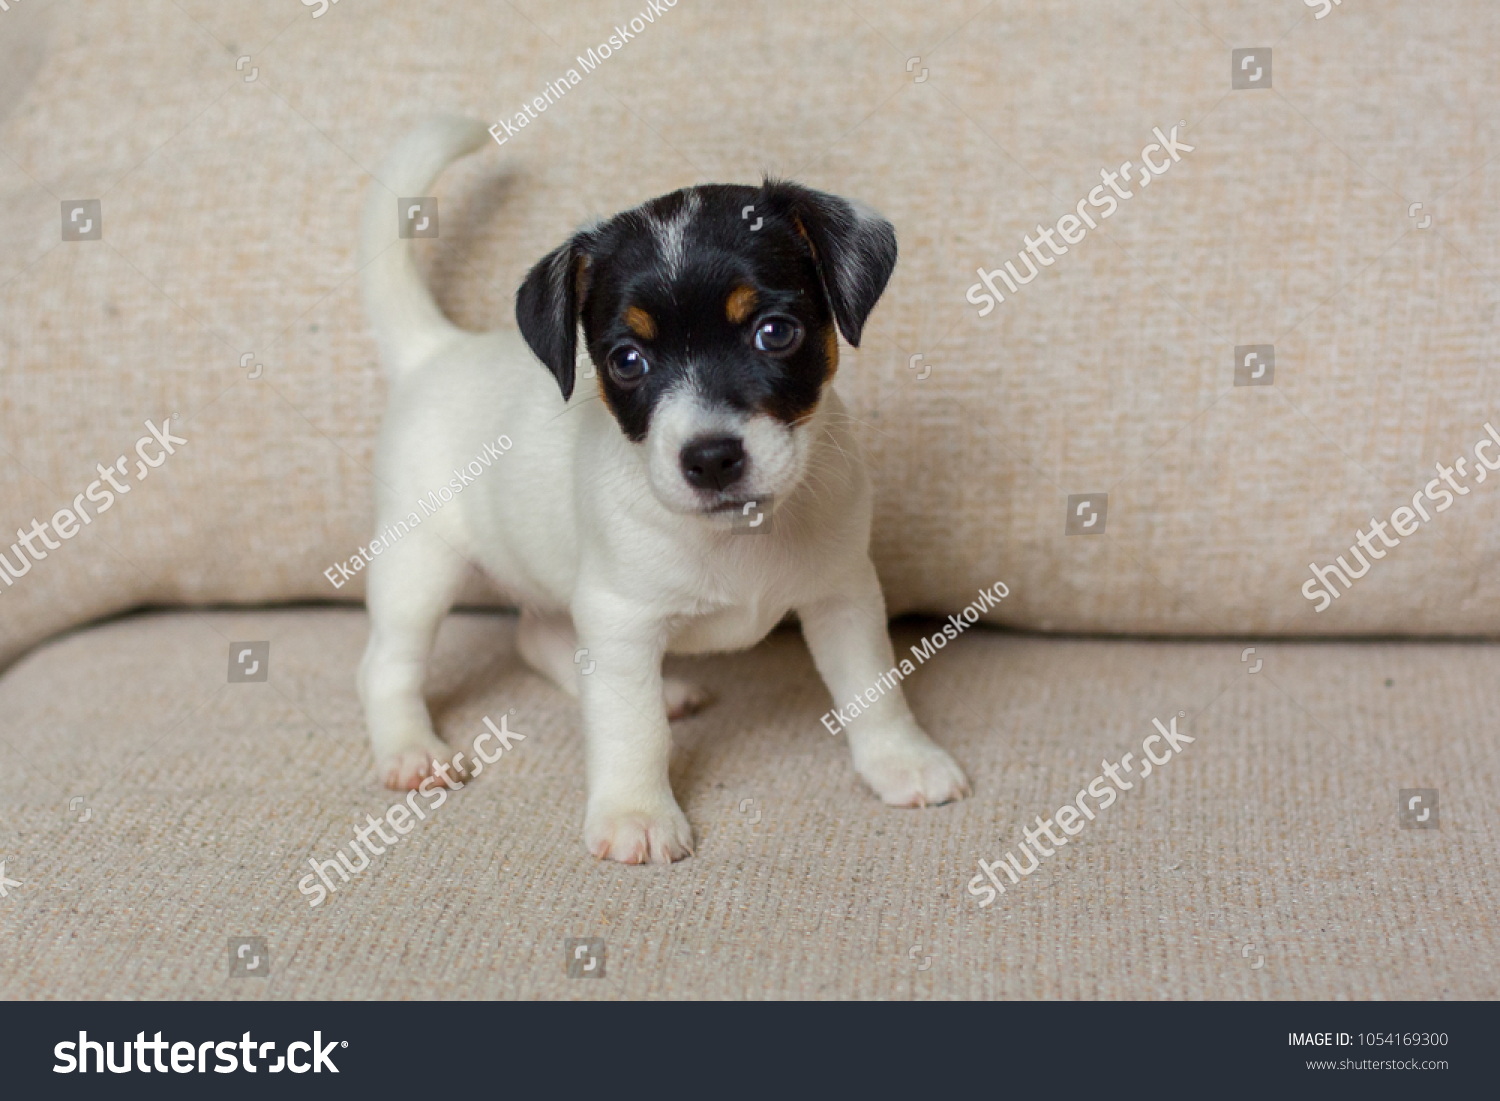 Puppies Jack Russell Terrier Family Dog Stock Photo Edit Now 1054169300